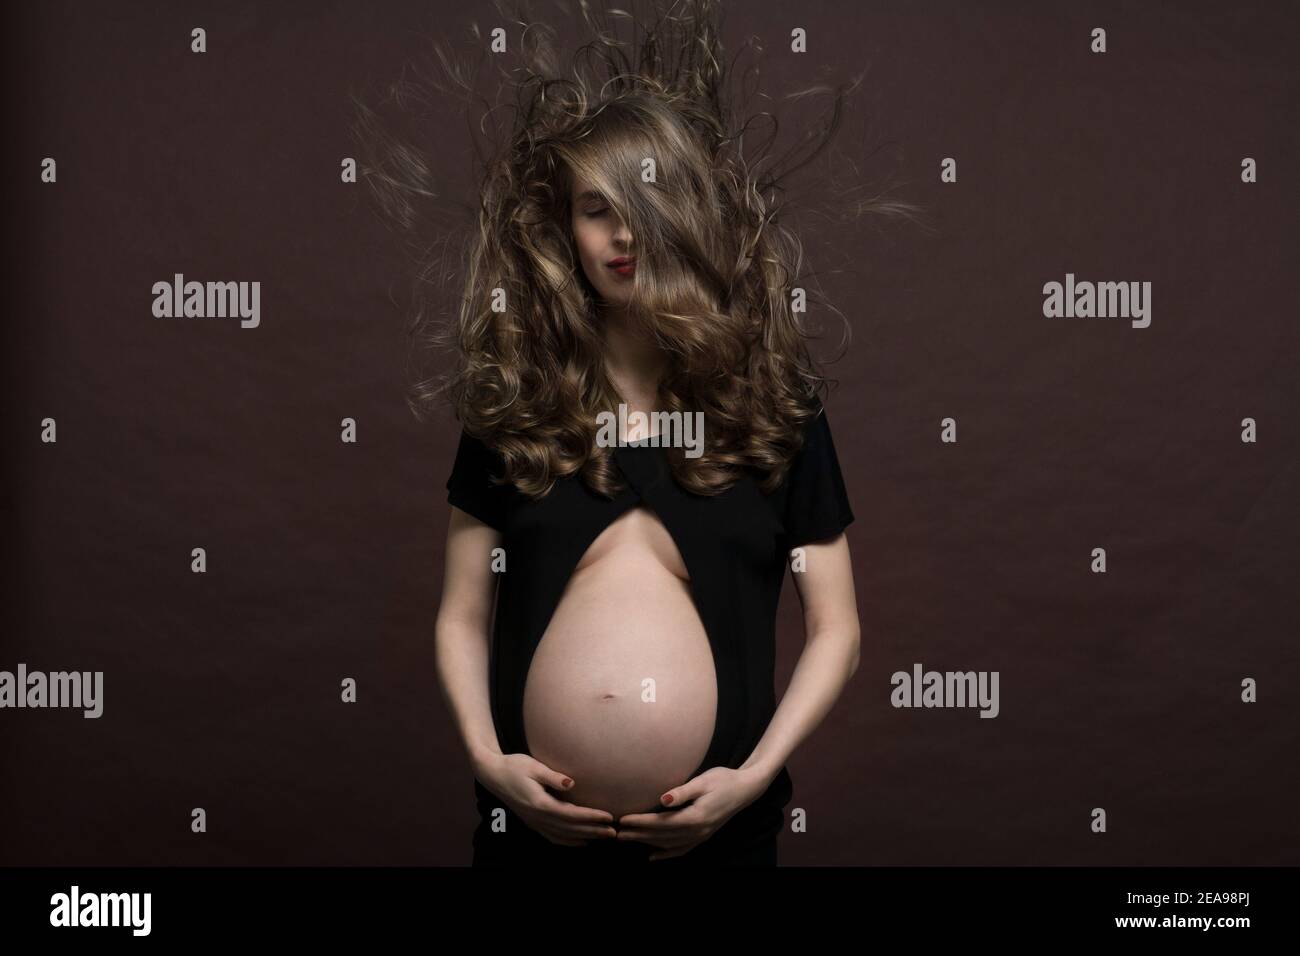 Pregnant woman, wind, blowing hair, studio Stock Photo